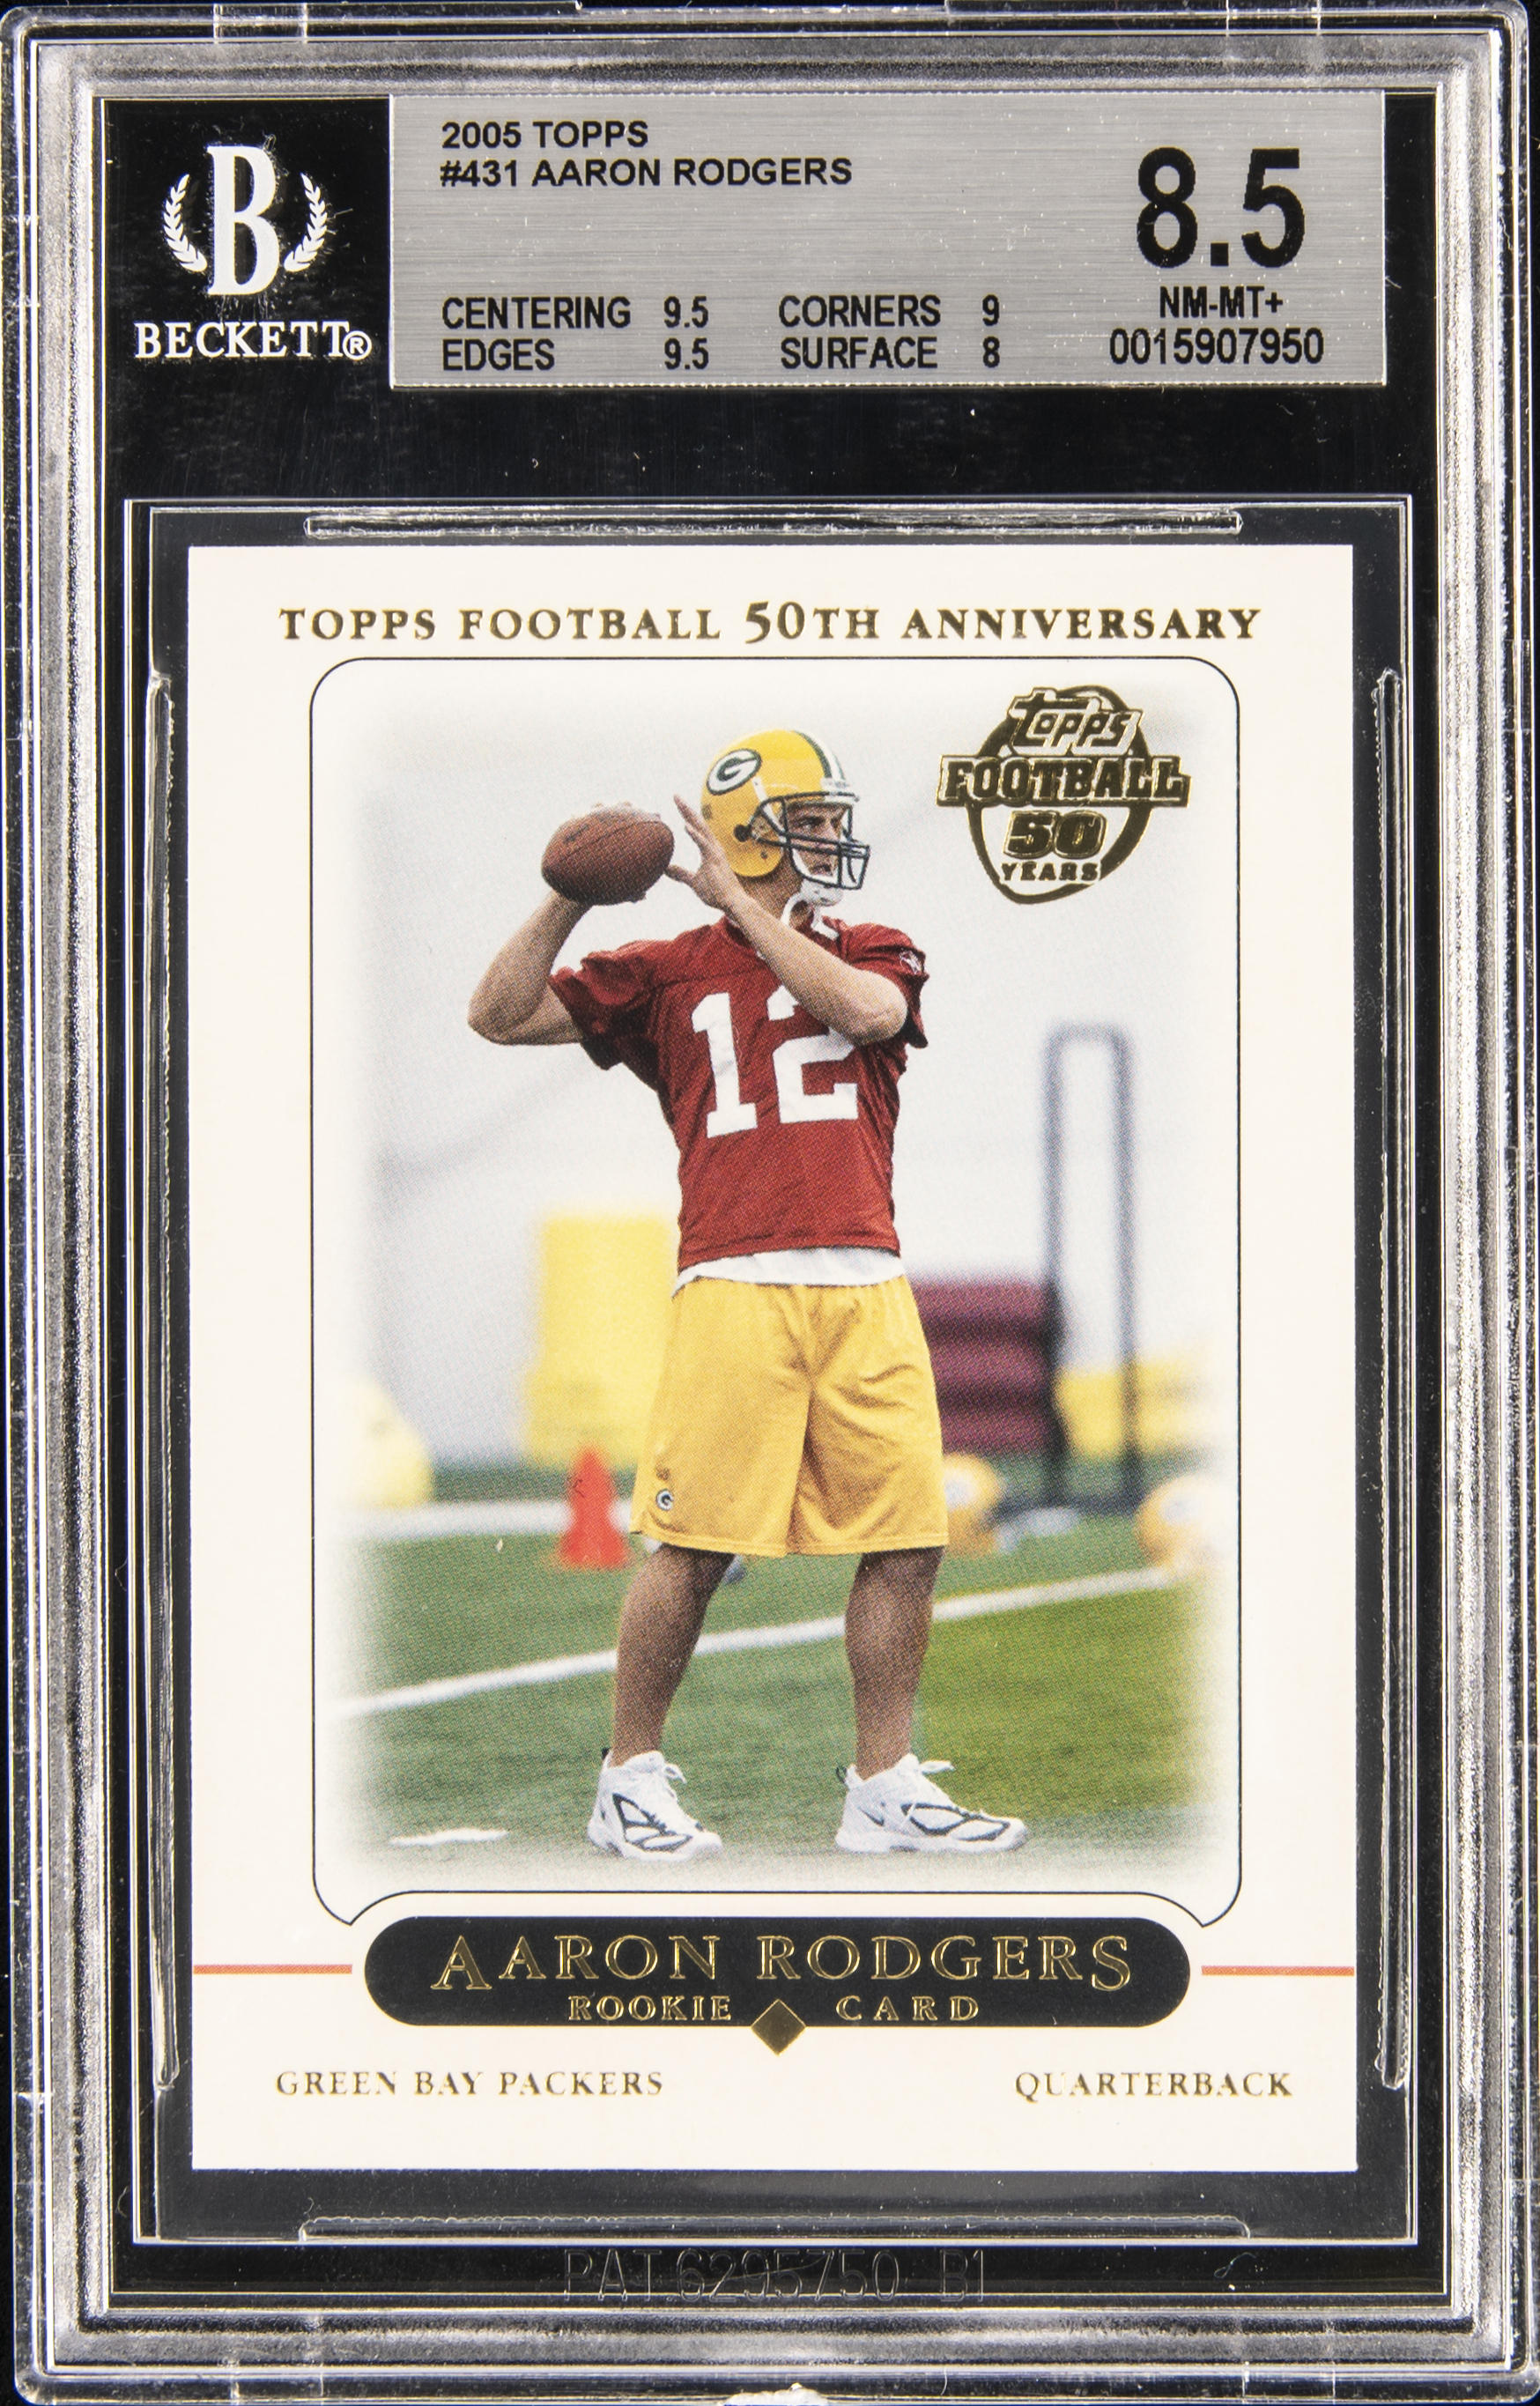 2005 Topps #431 Aaron Rodgers Rookie Card - BGS NM-MT+ 8.5